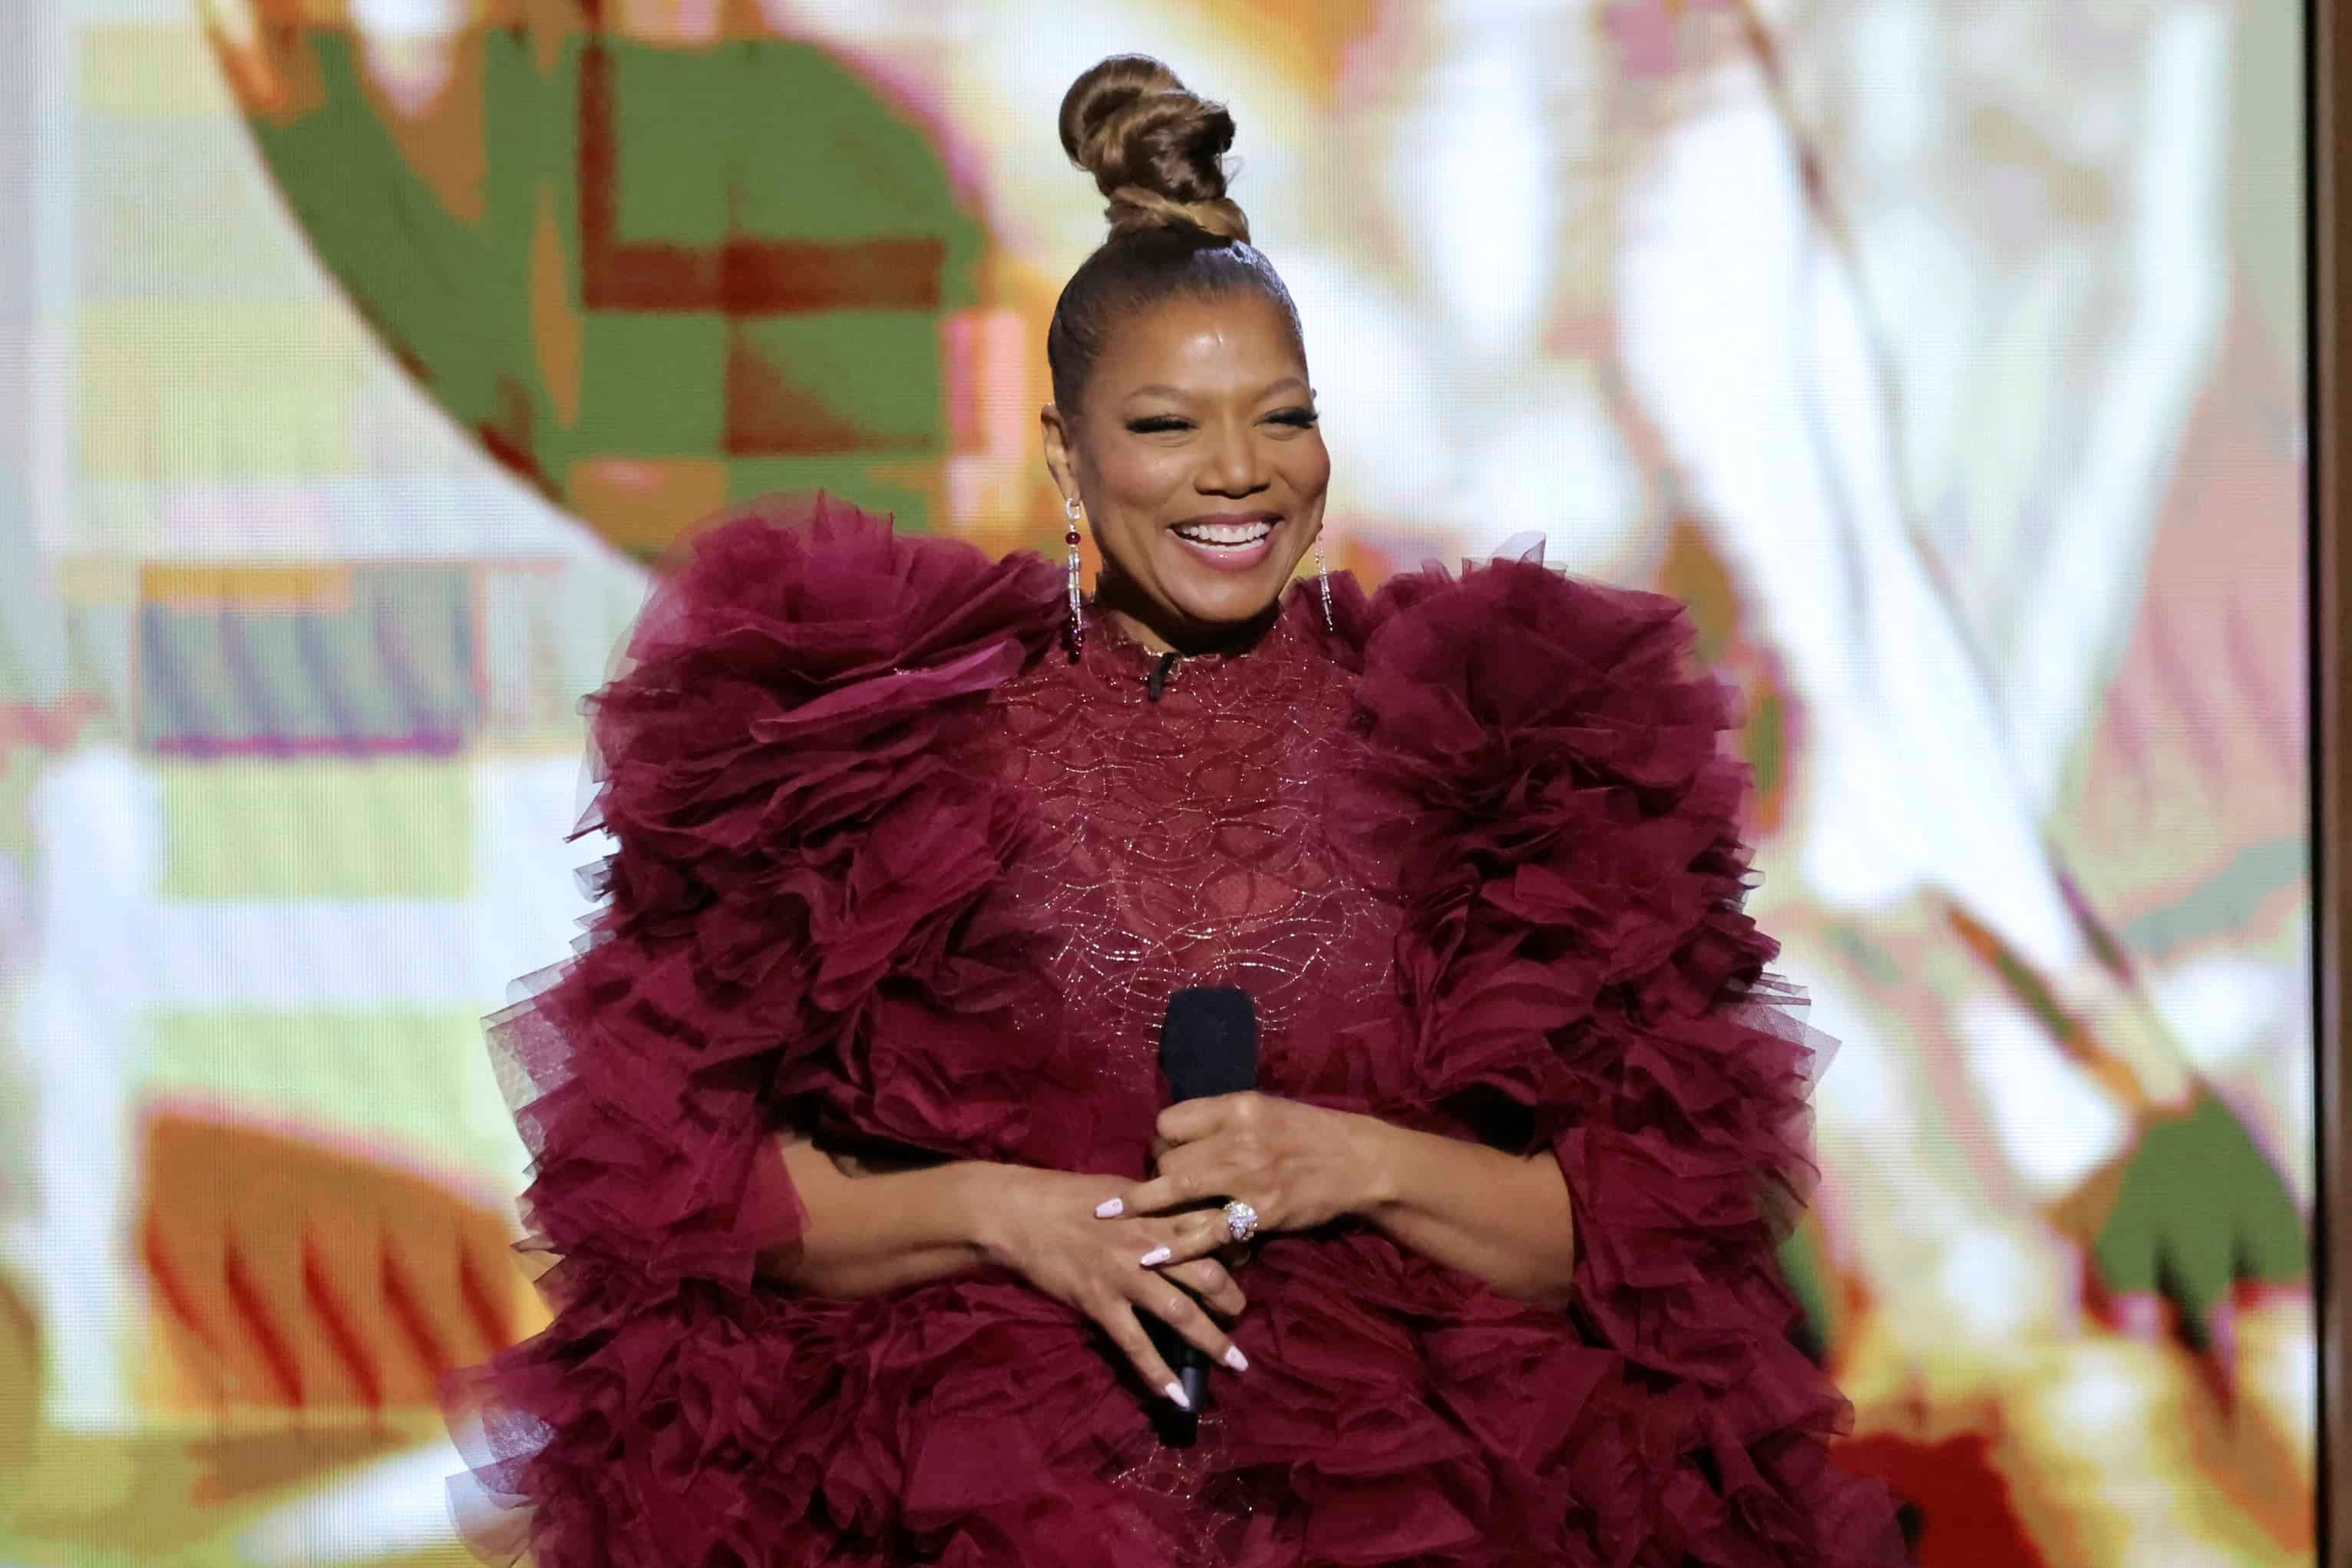 Queen Latifah Makes History In The Library of Congress